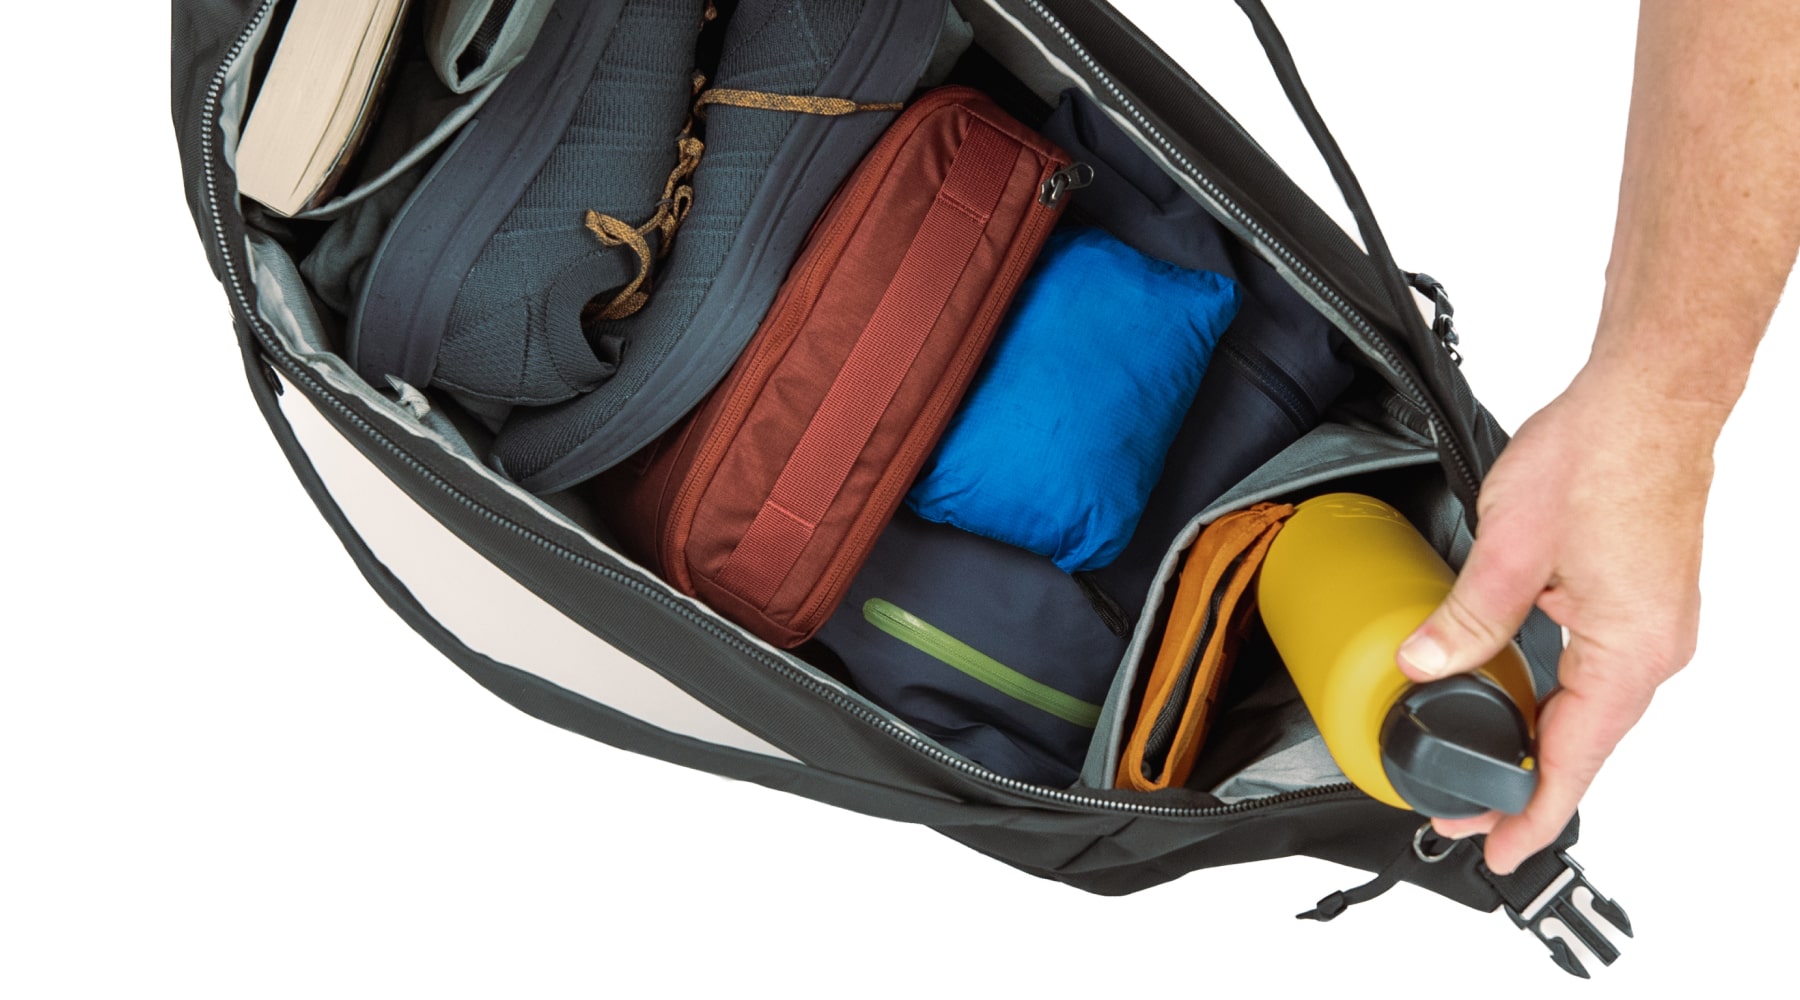 Transit Duffel 35L comes with collapsible water bottle pockets